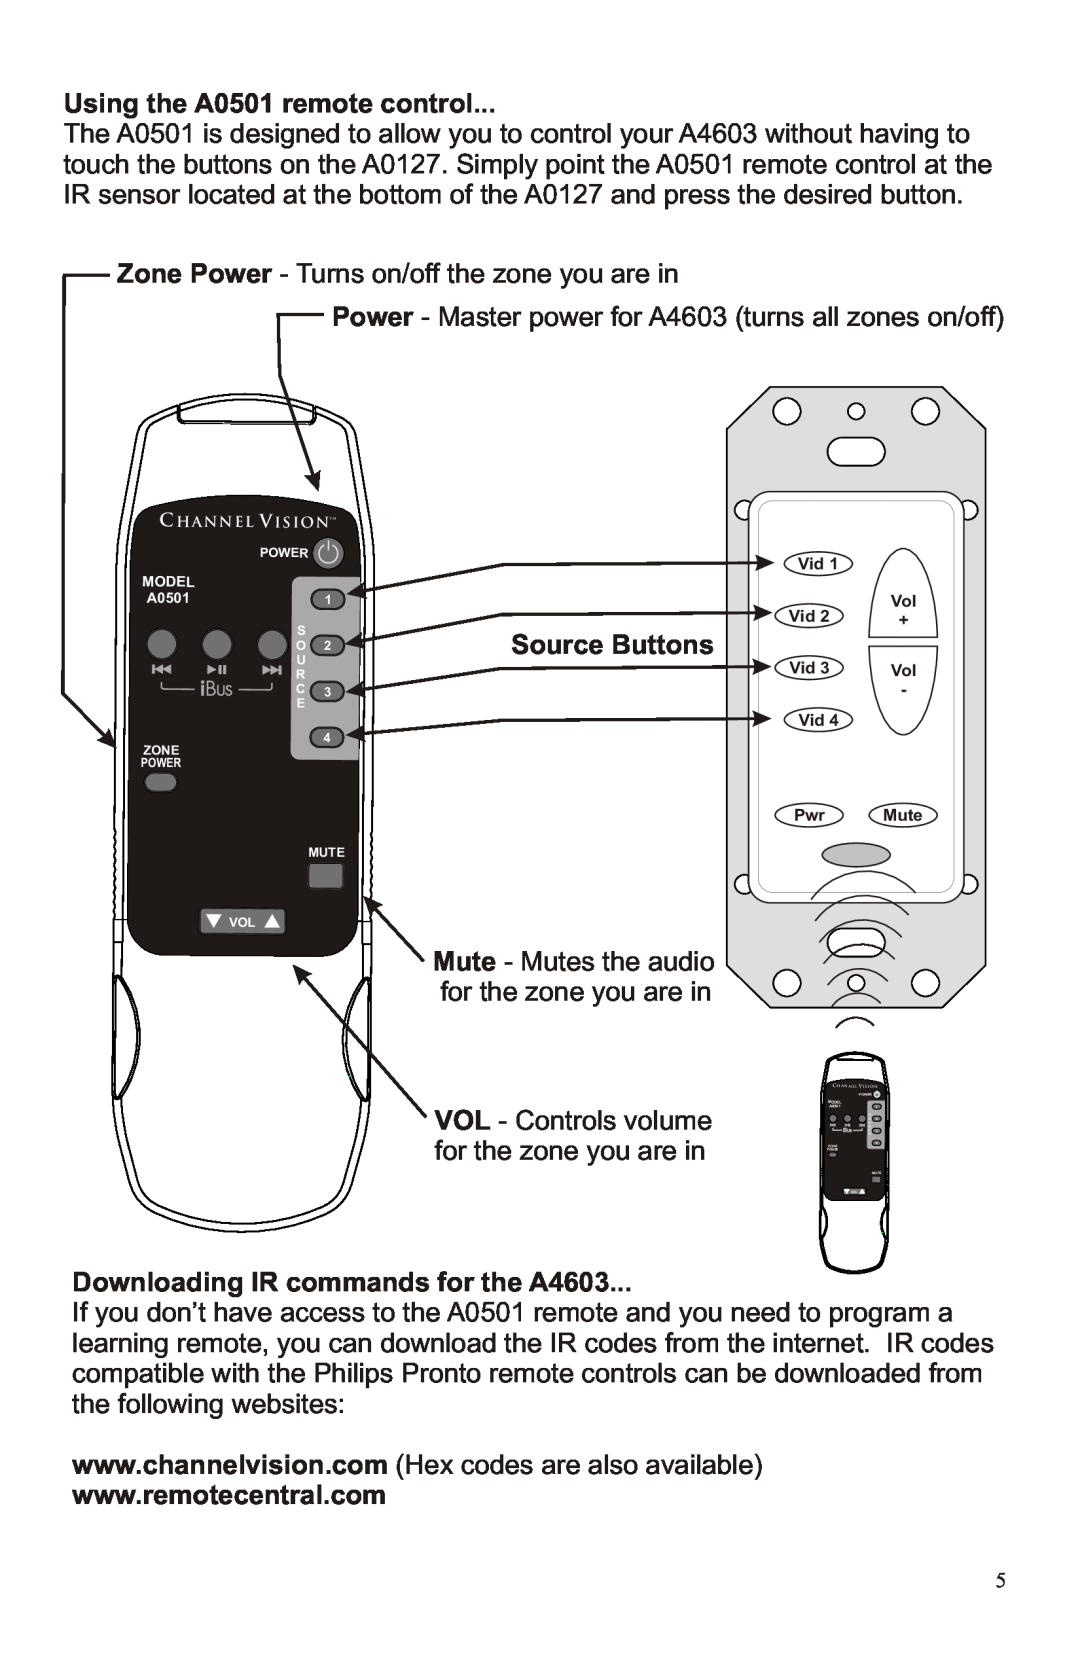 Channel Vision A4630R manual Using the A0501 remote control, Source Buttons, Downloading IR commands for the A4603 